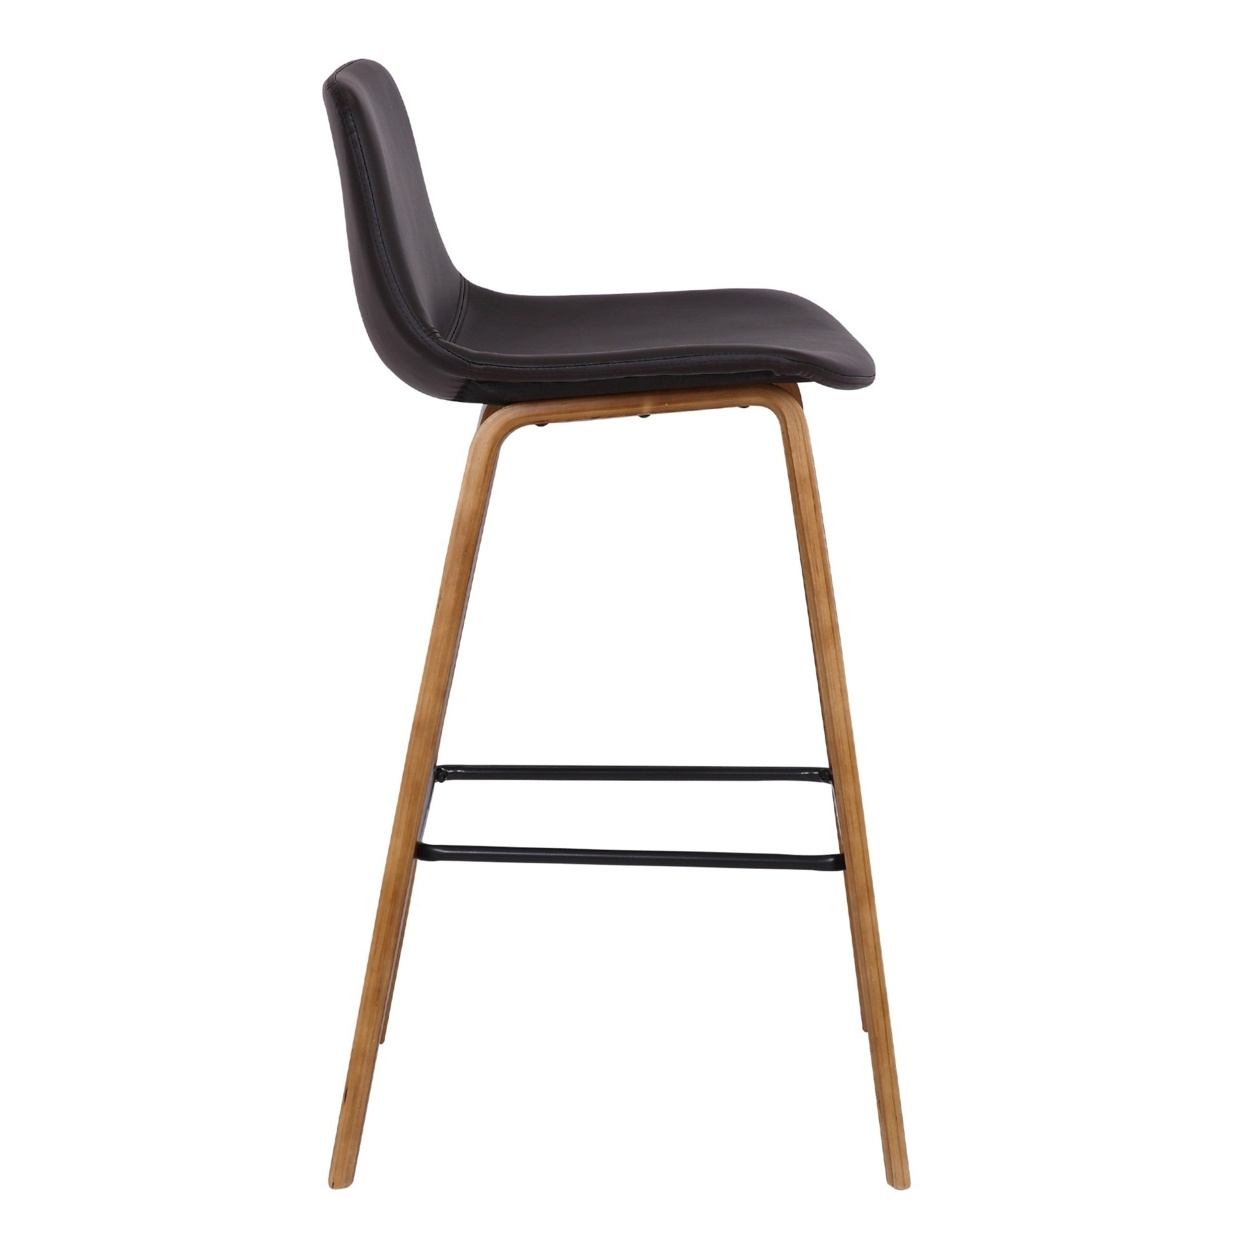 35 Inch Wooden Barstool With Leatherette Seat, Brown- Saltoro Sherpi